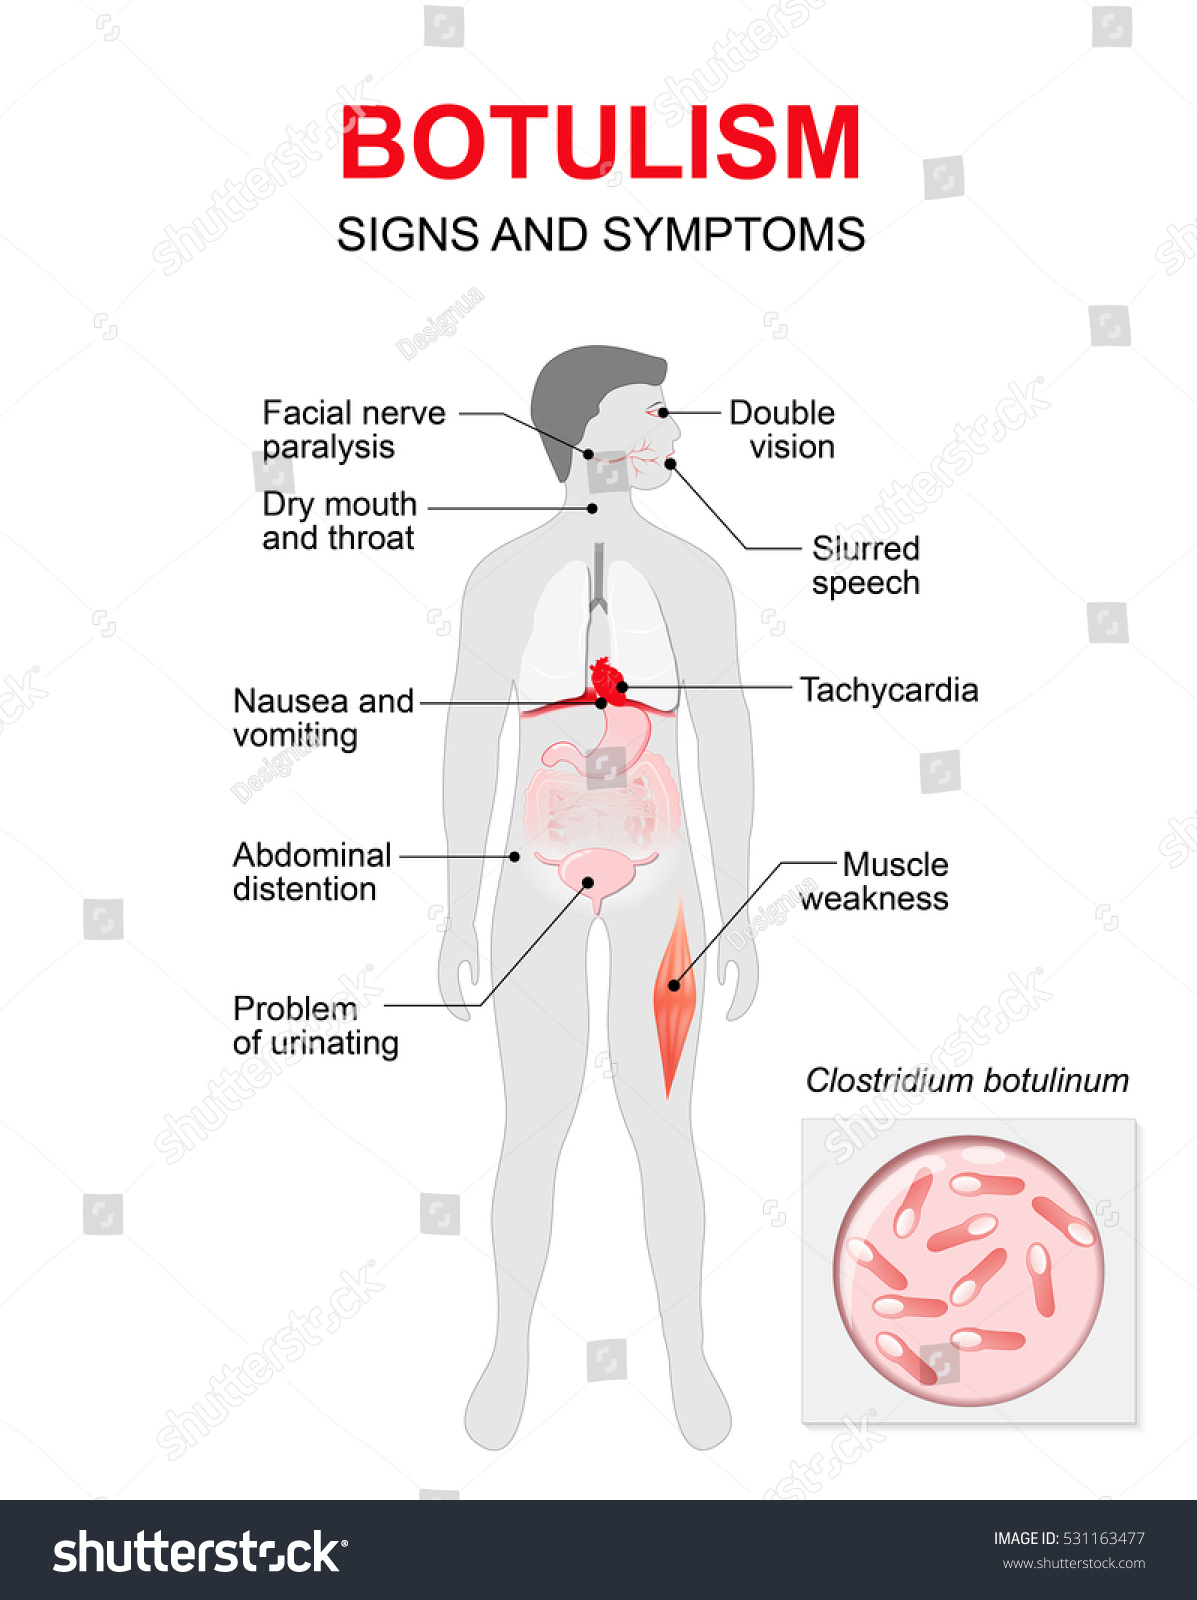 Botulism is a fatal illness caused by a toxin, produced by the bacterium. Signs and symptoms. Human silhouette with highlighted internal organs.